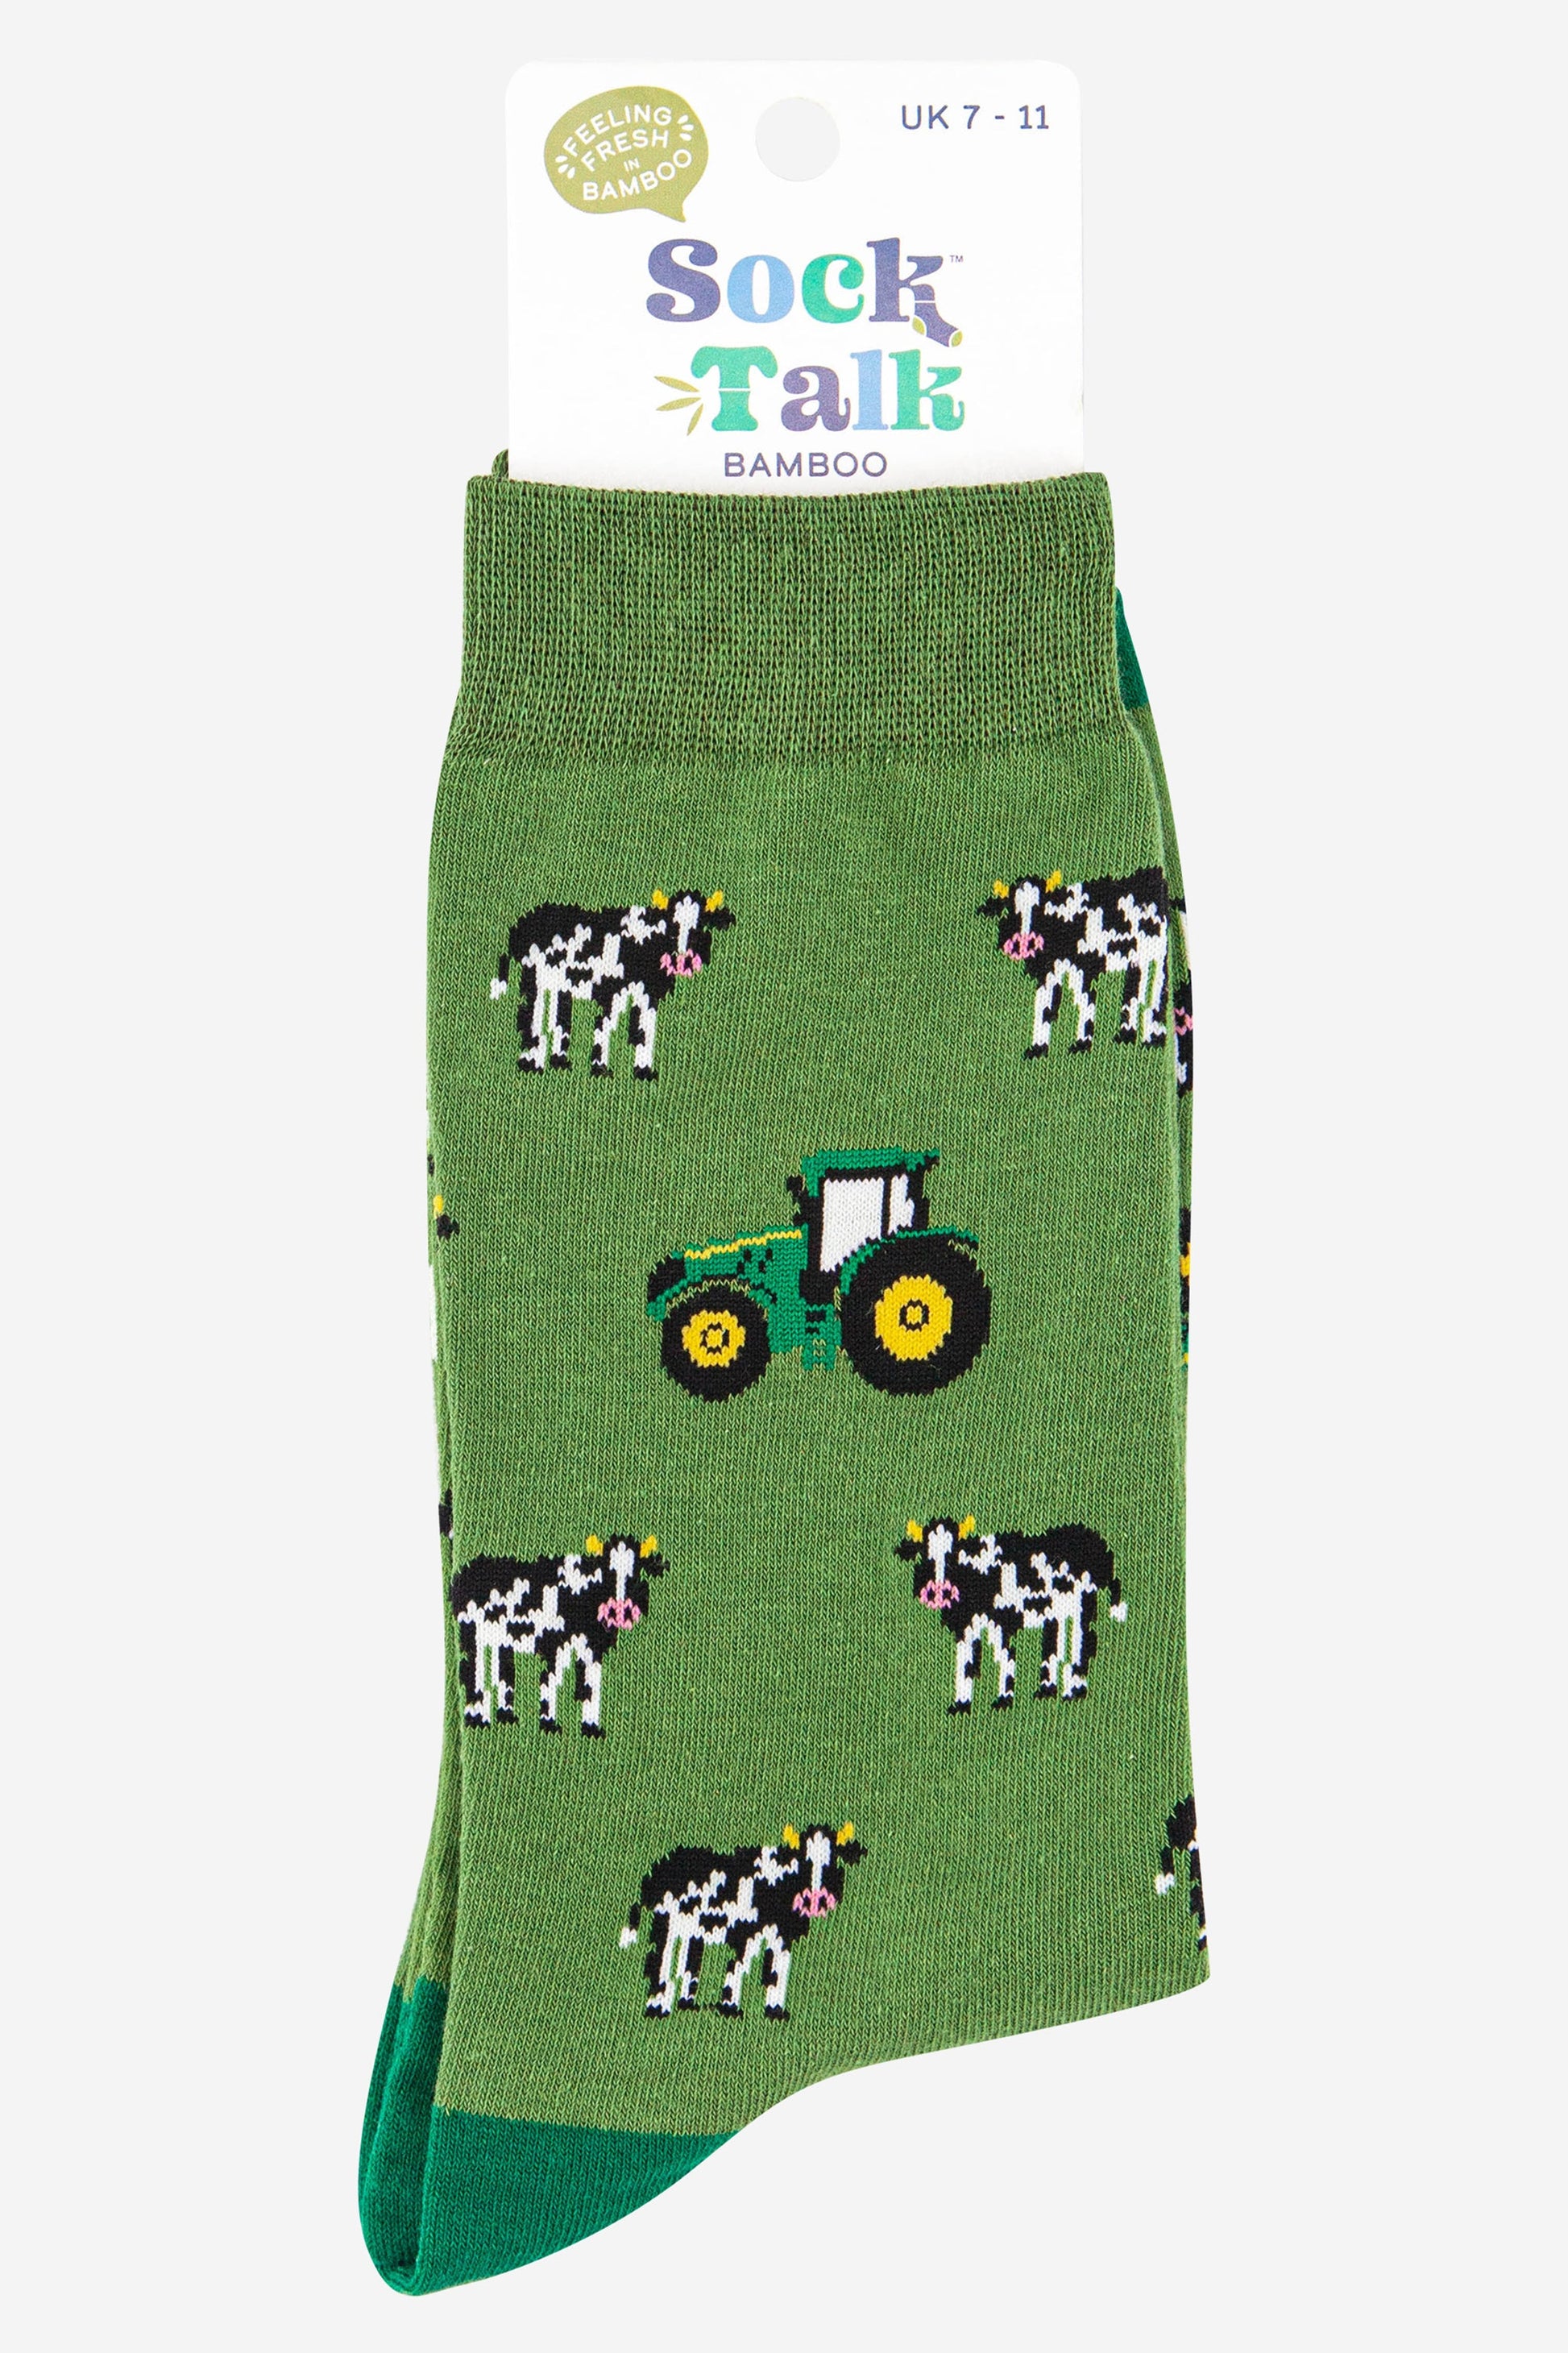 green tractor and cow print bamboo socks uk size 7-11